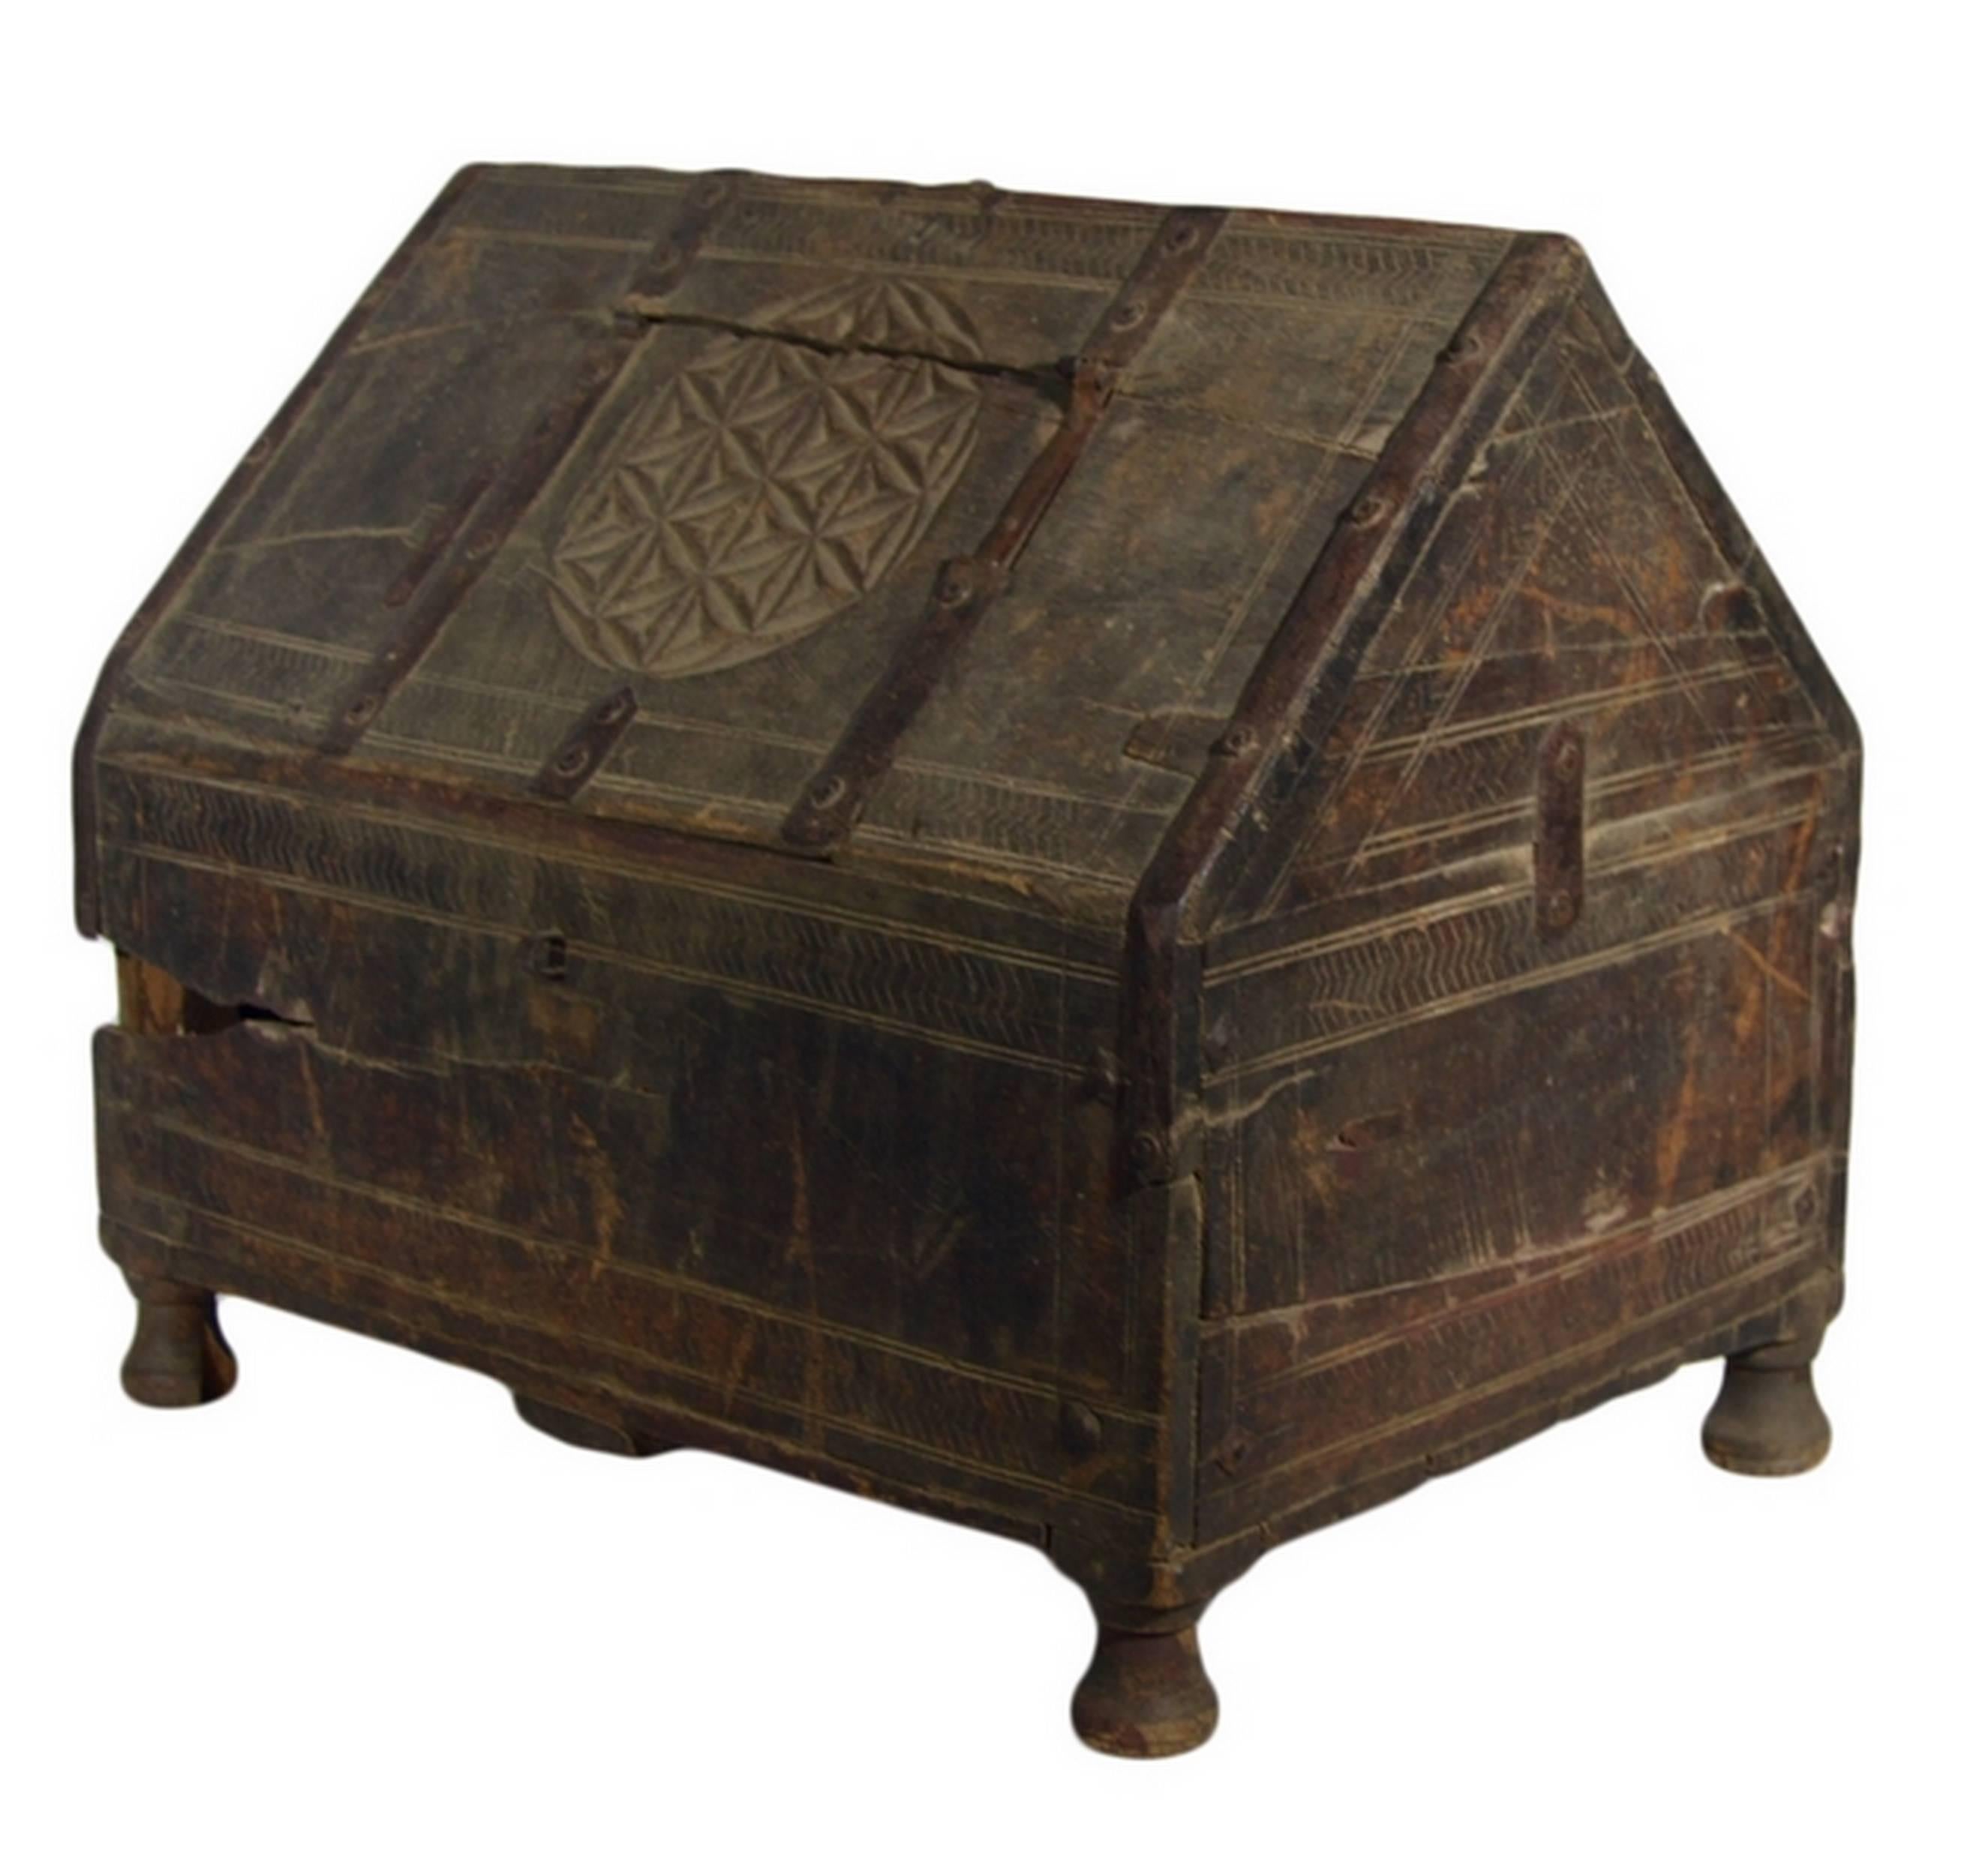 A 19th century Mughal dowry chest with carved patterns from India. This chest wooden chest with a slanted top strengthened by metal hardware reinforcements. The front displays lightly carved geometrical friezes. A large carved geometrical medallion